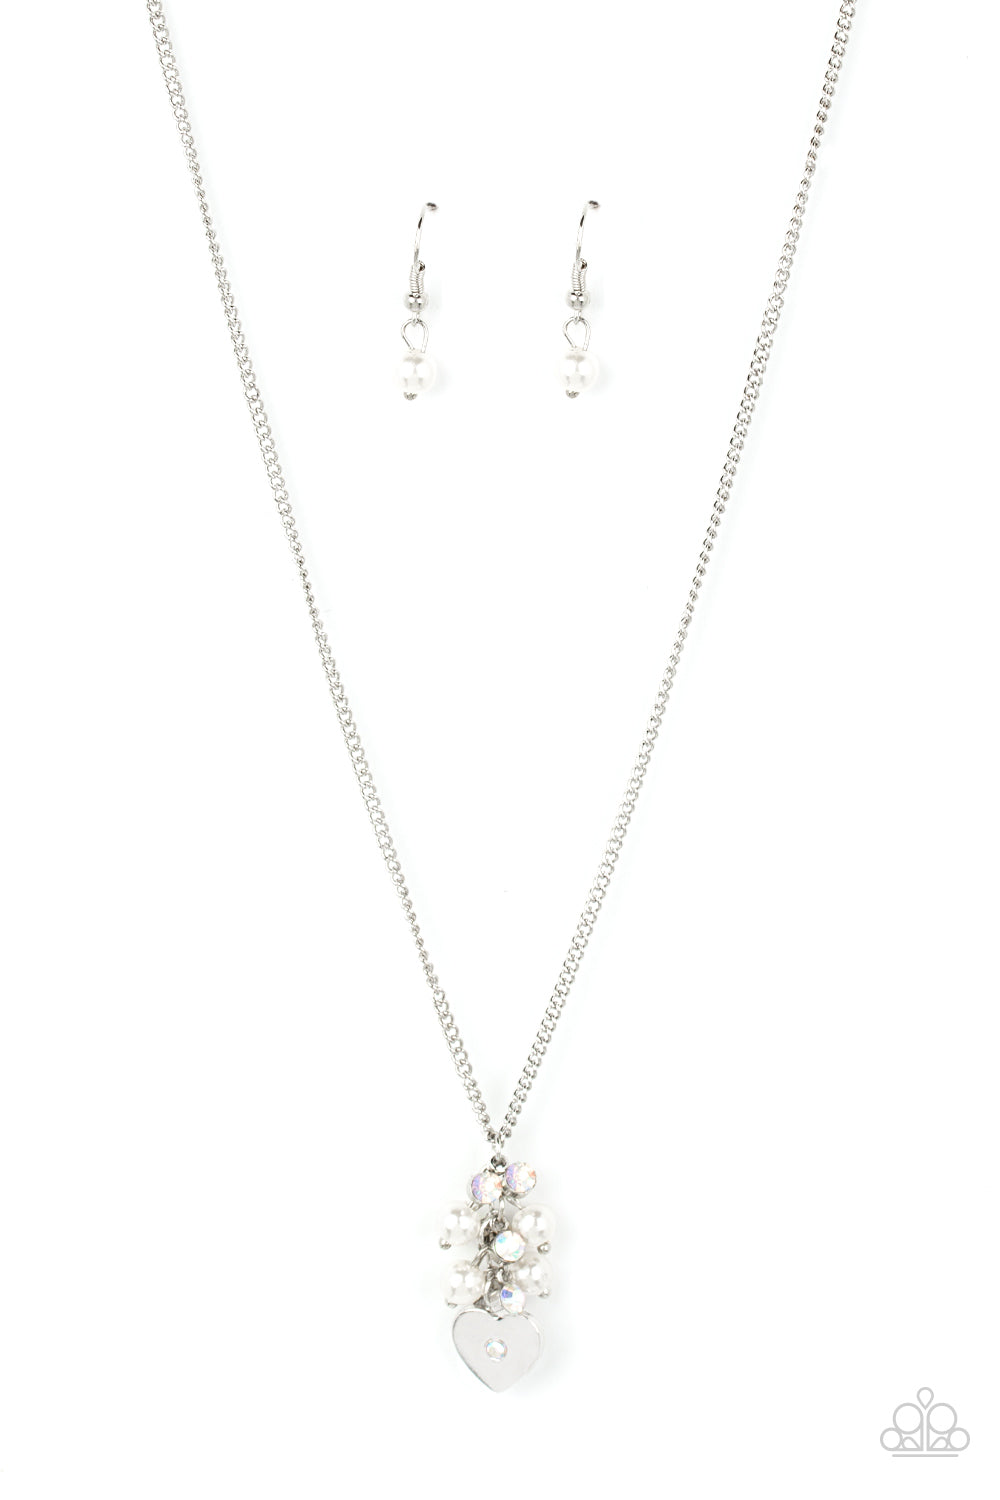 Pop It and LOCKET Multi Necklace - Paparazzi Accessories  Dotted with a dainty iridescent rhinestone, a shiny silver heart swings from the bottom of a bubbly cluster of white pearls and iridescent rhinestones, creating a locket inspired pendant below the collar. Features an adjustable clasp closure.  Sold as one individual necklace. Includes one pair of matching earrings.